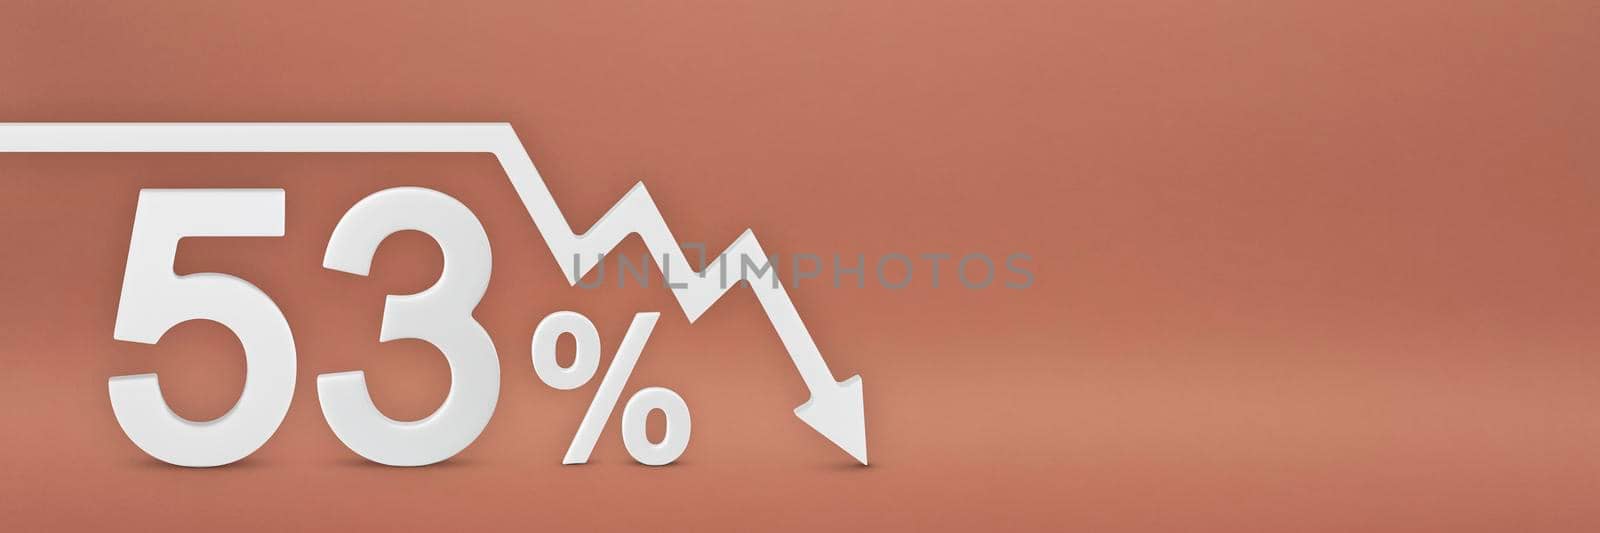 fifty-three percent, the arrow on the graph is pointing down. Stock market crash, bear market, inflation.Economic collapse, collapse of stocks.3d banner,53 percent discount sign on a red background. by SERSOL